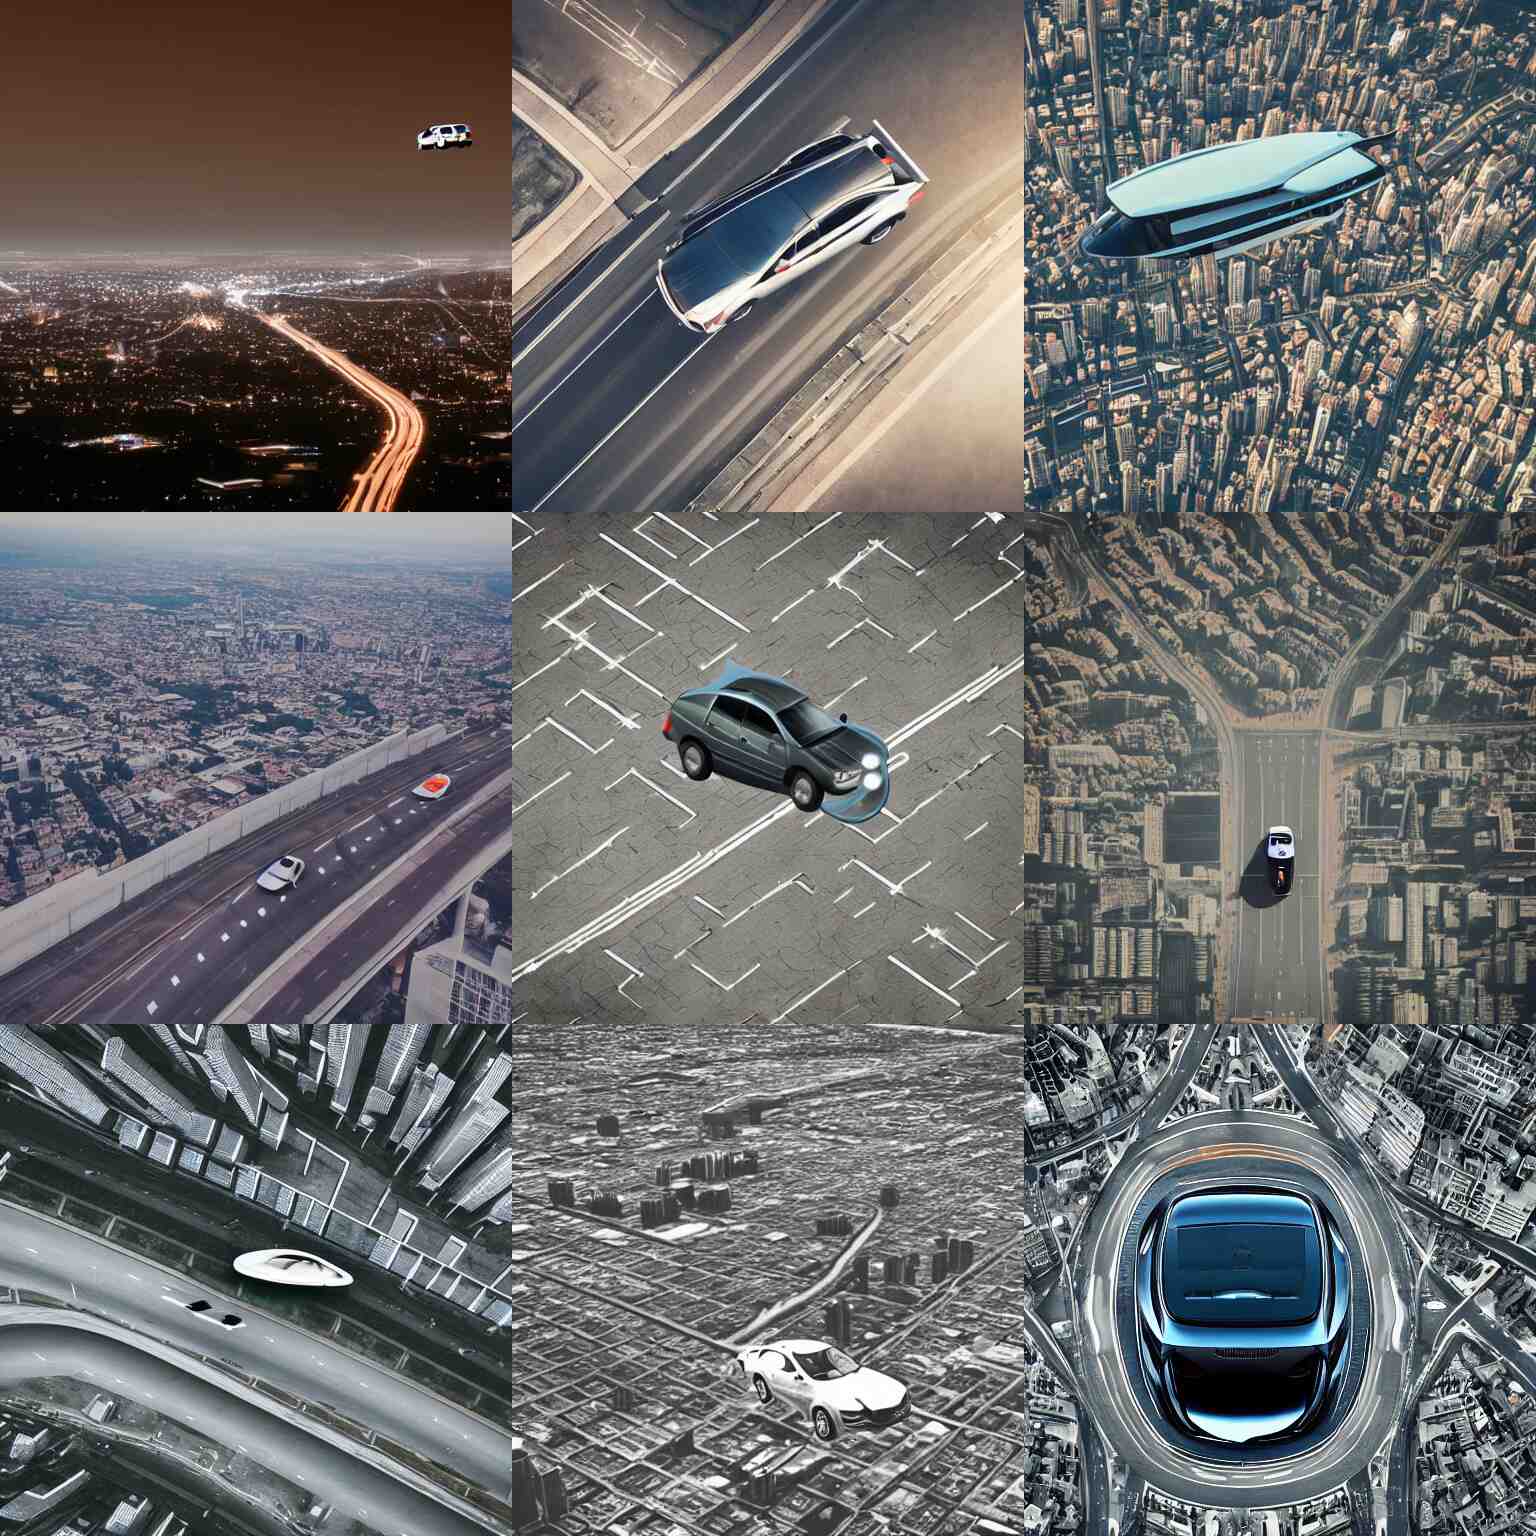 Do Vehicle Categorization In Photos Without Any Problems Using An API